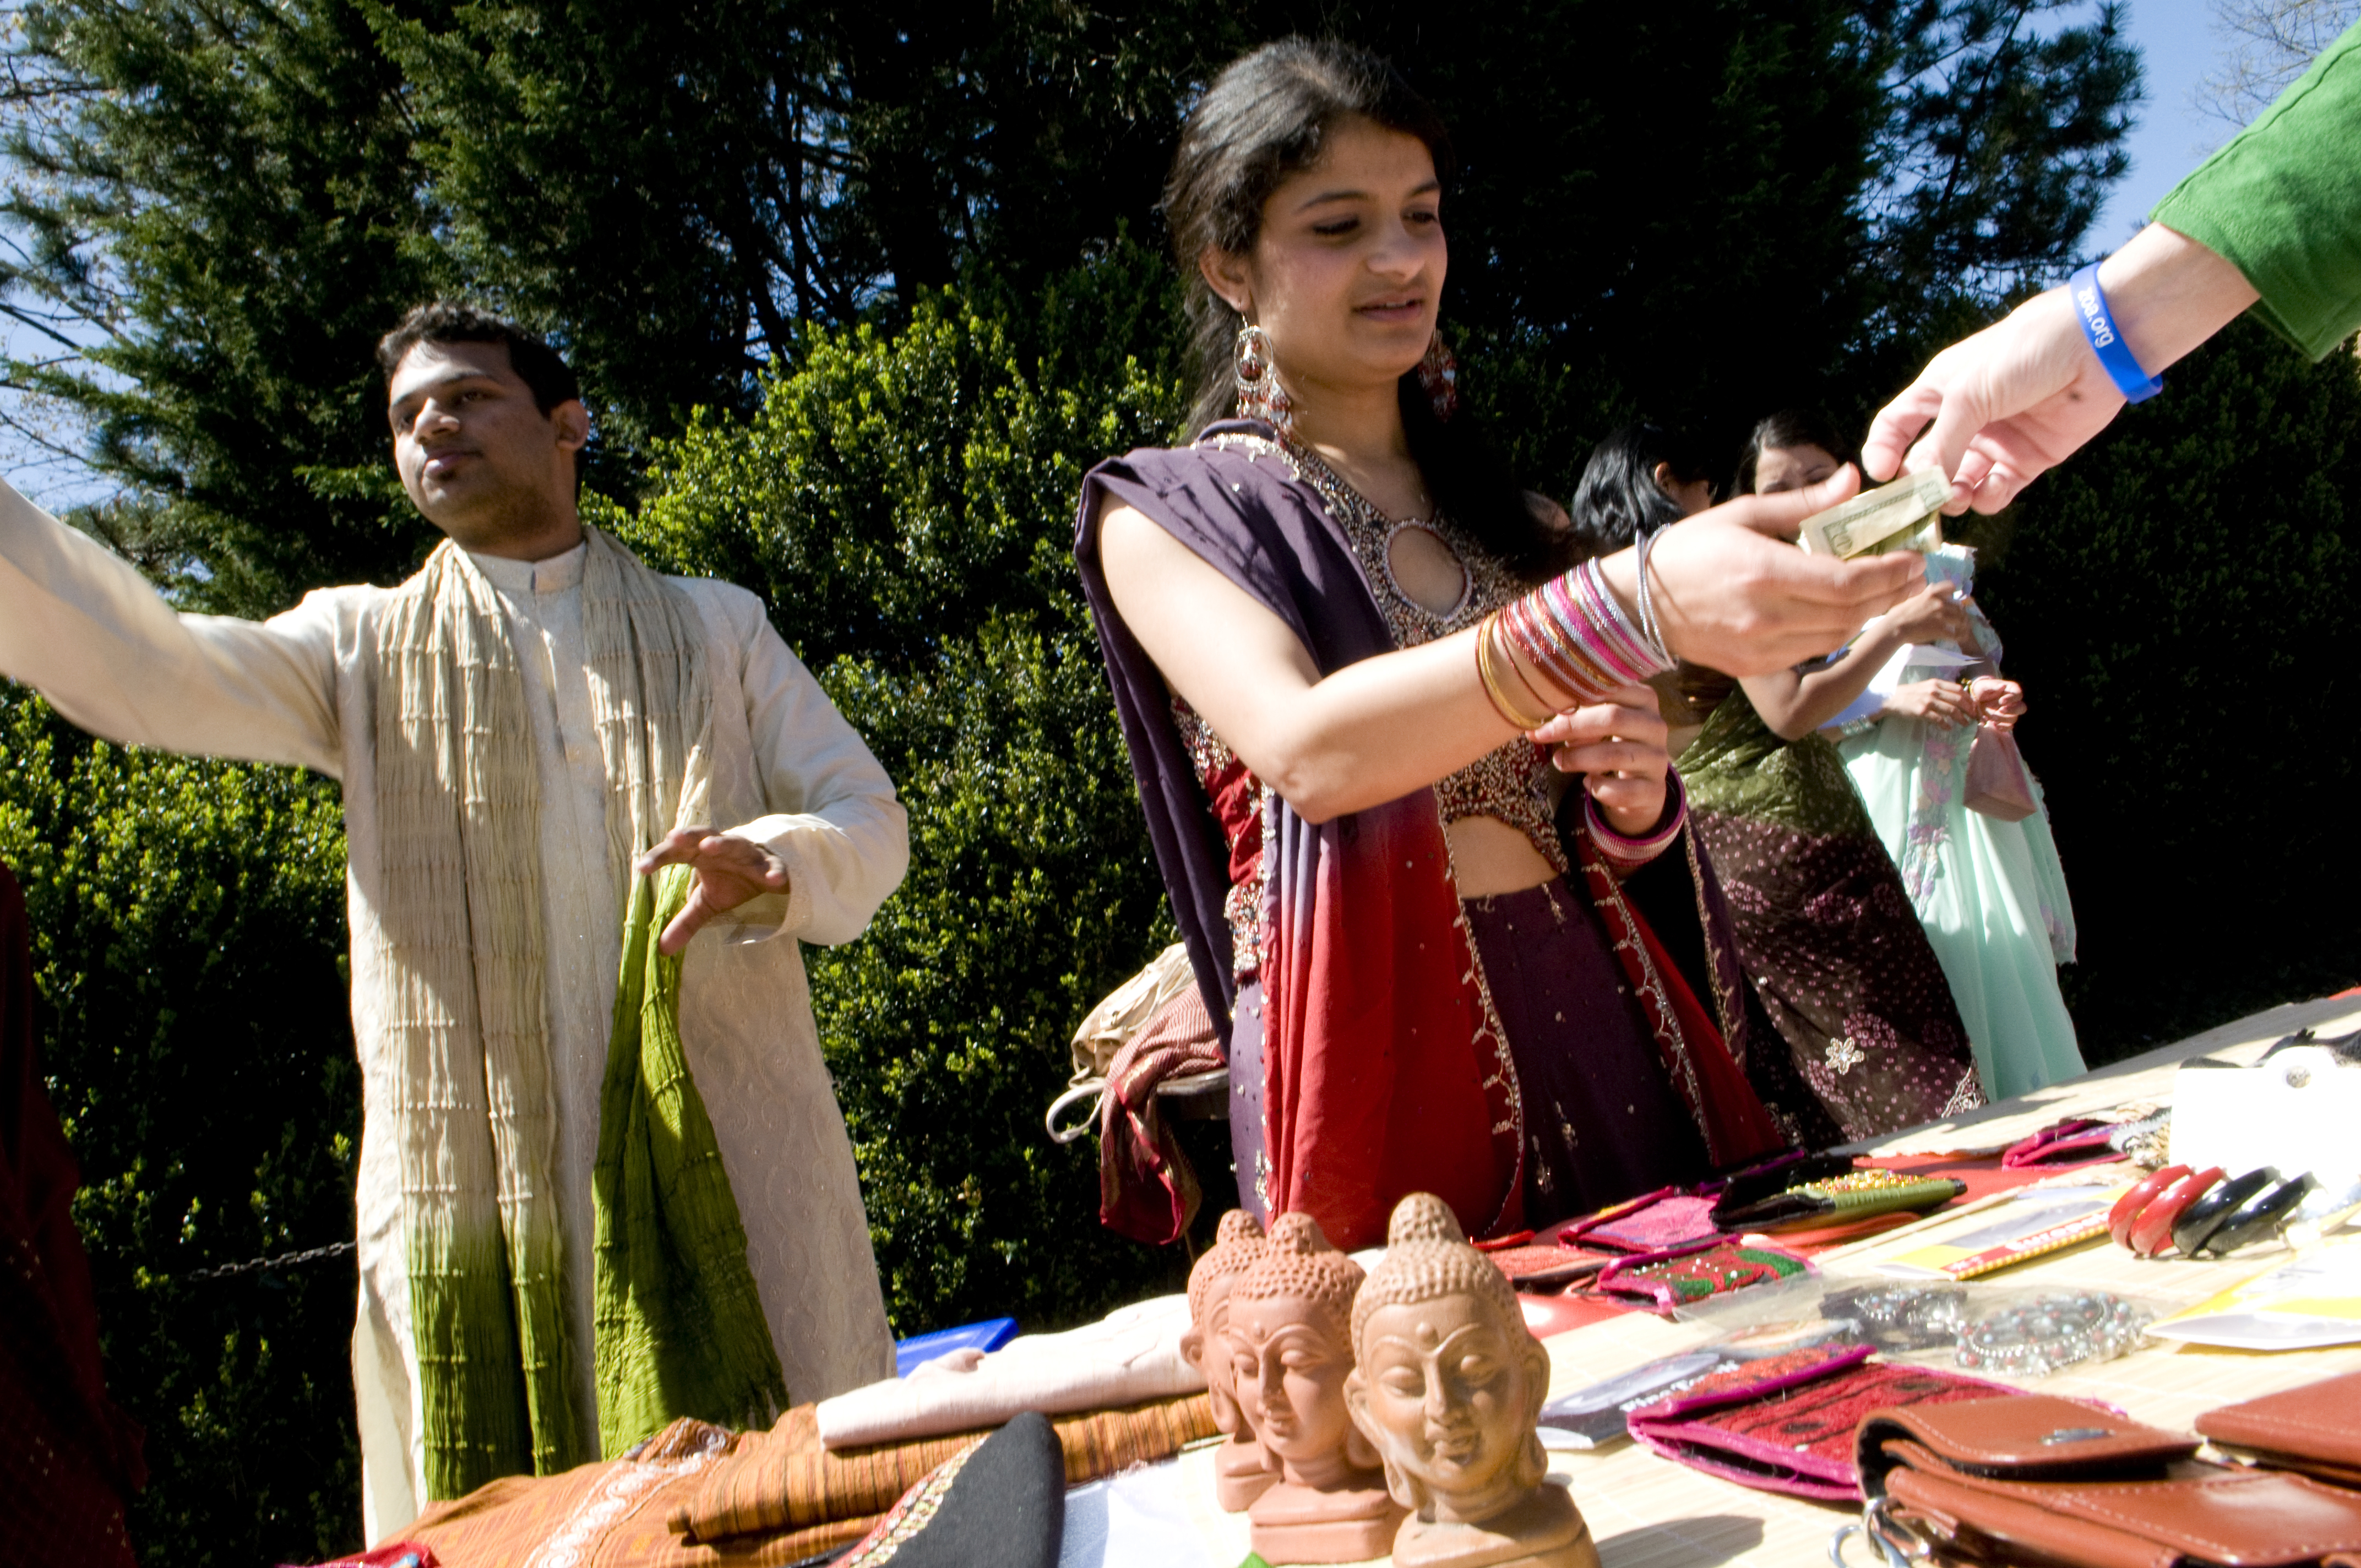 A young woman and young man stand behind a table at the street fair selling international crafts.